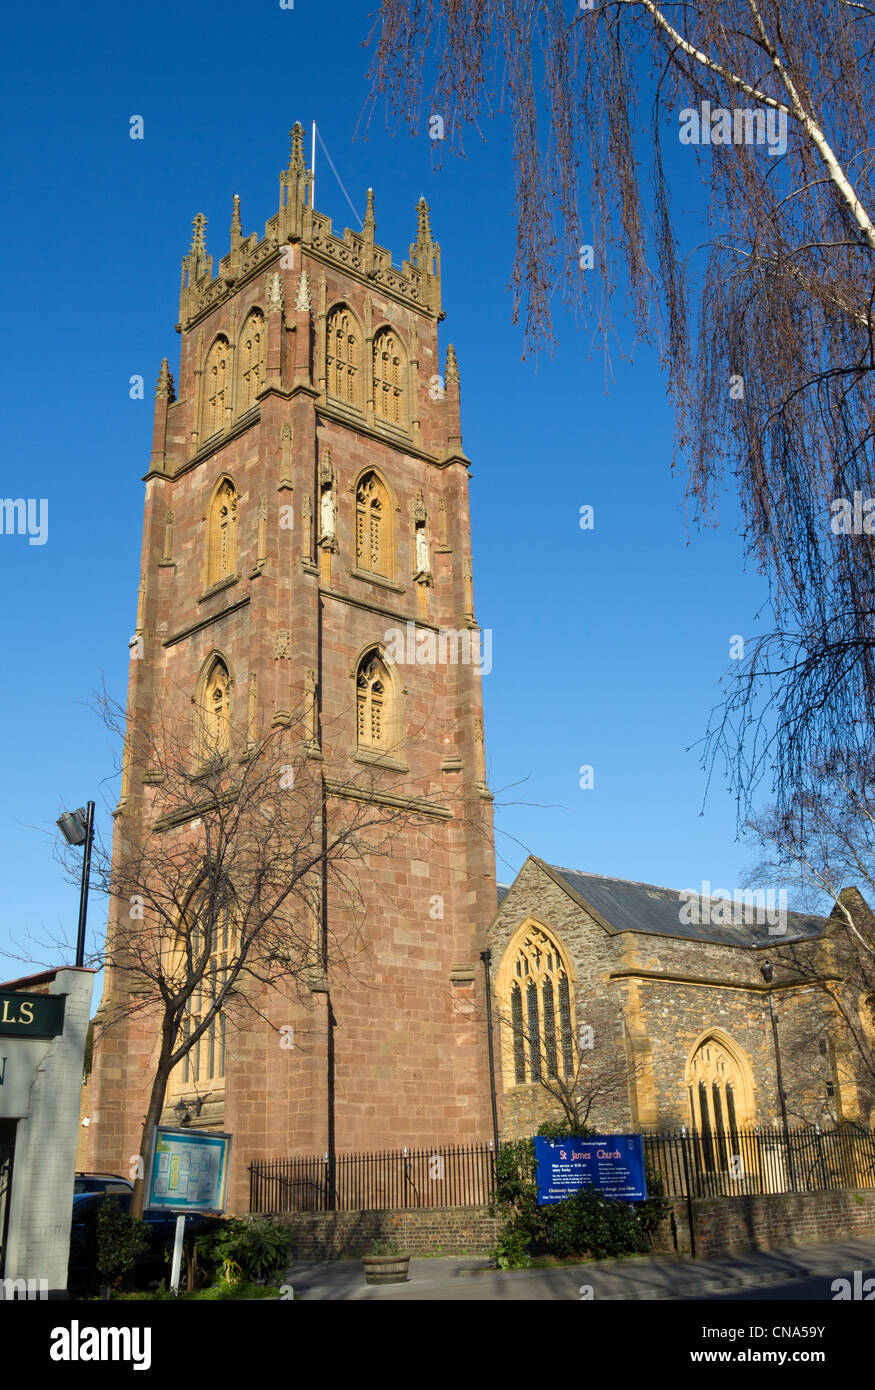 St James Church and West Tower in Taunton, Somerset UK. Stock Photo